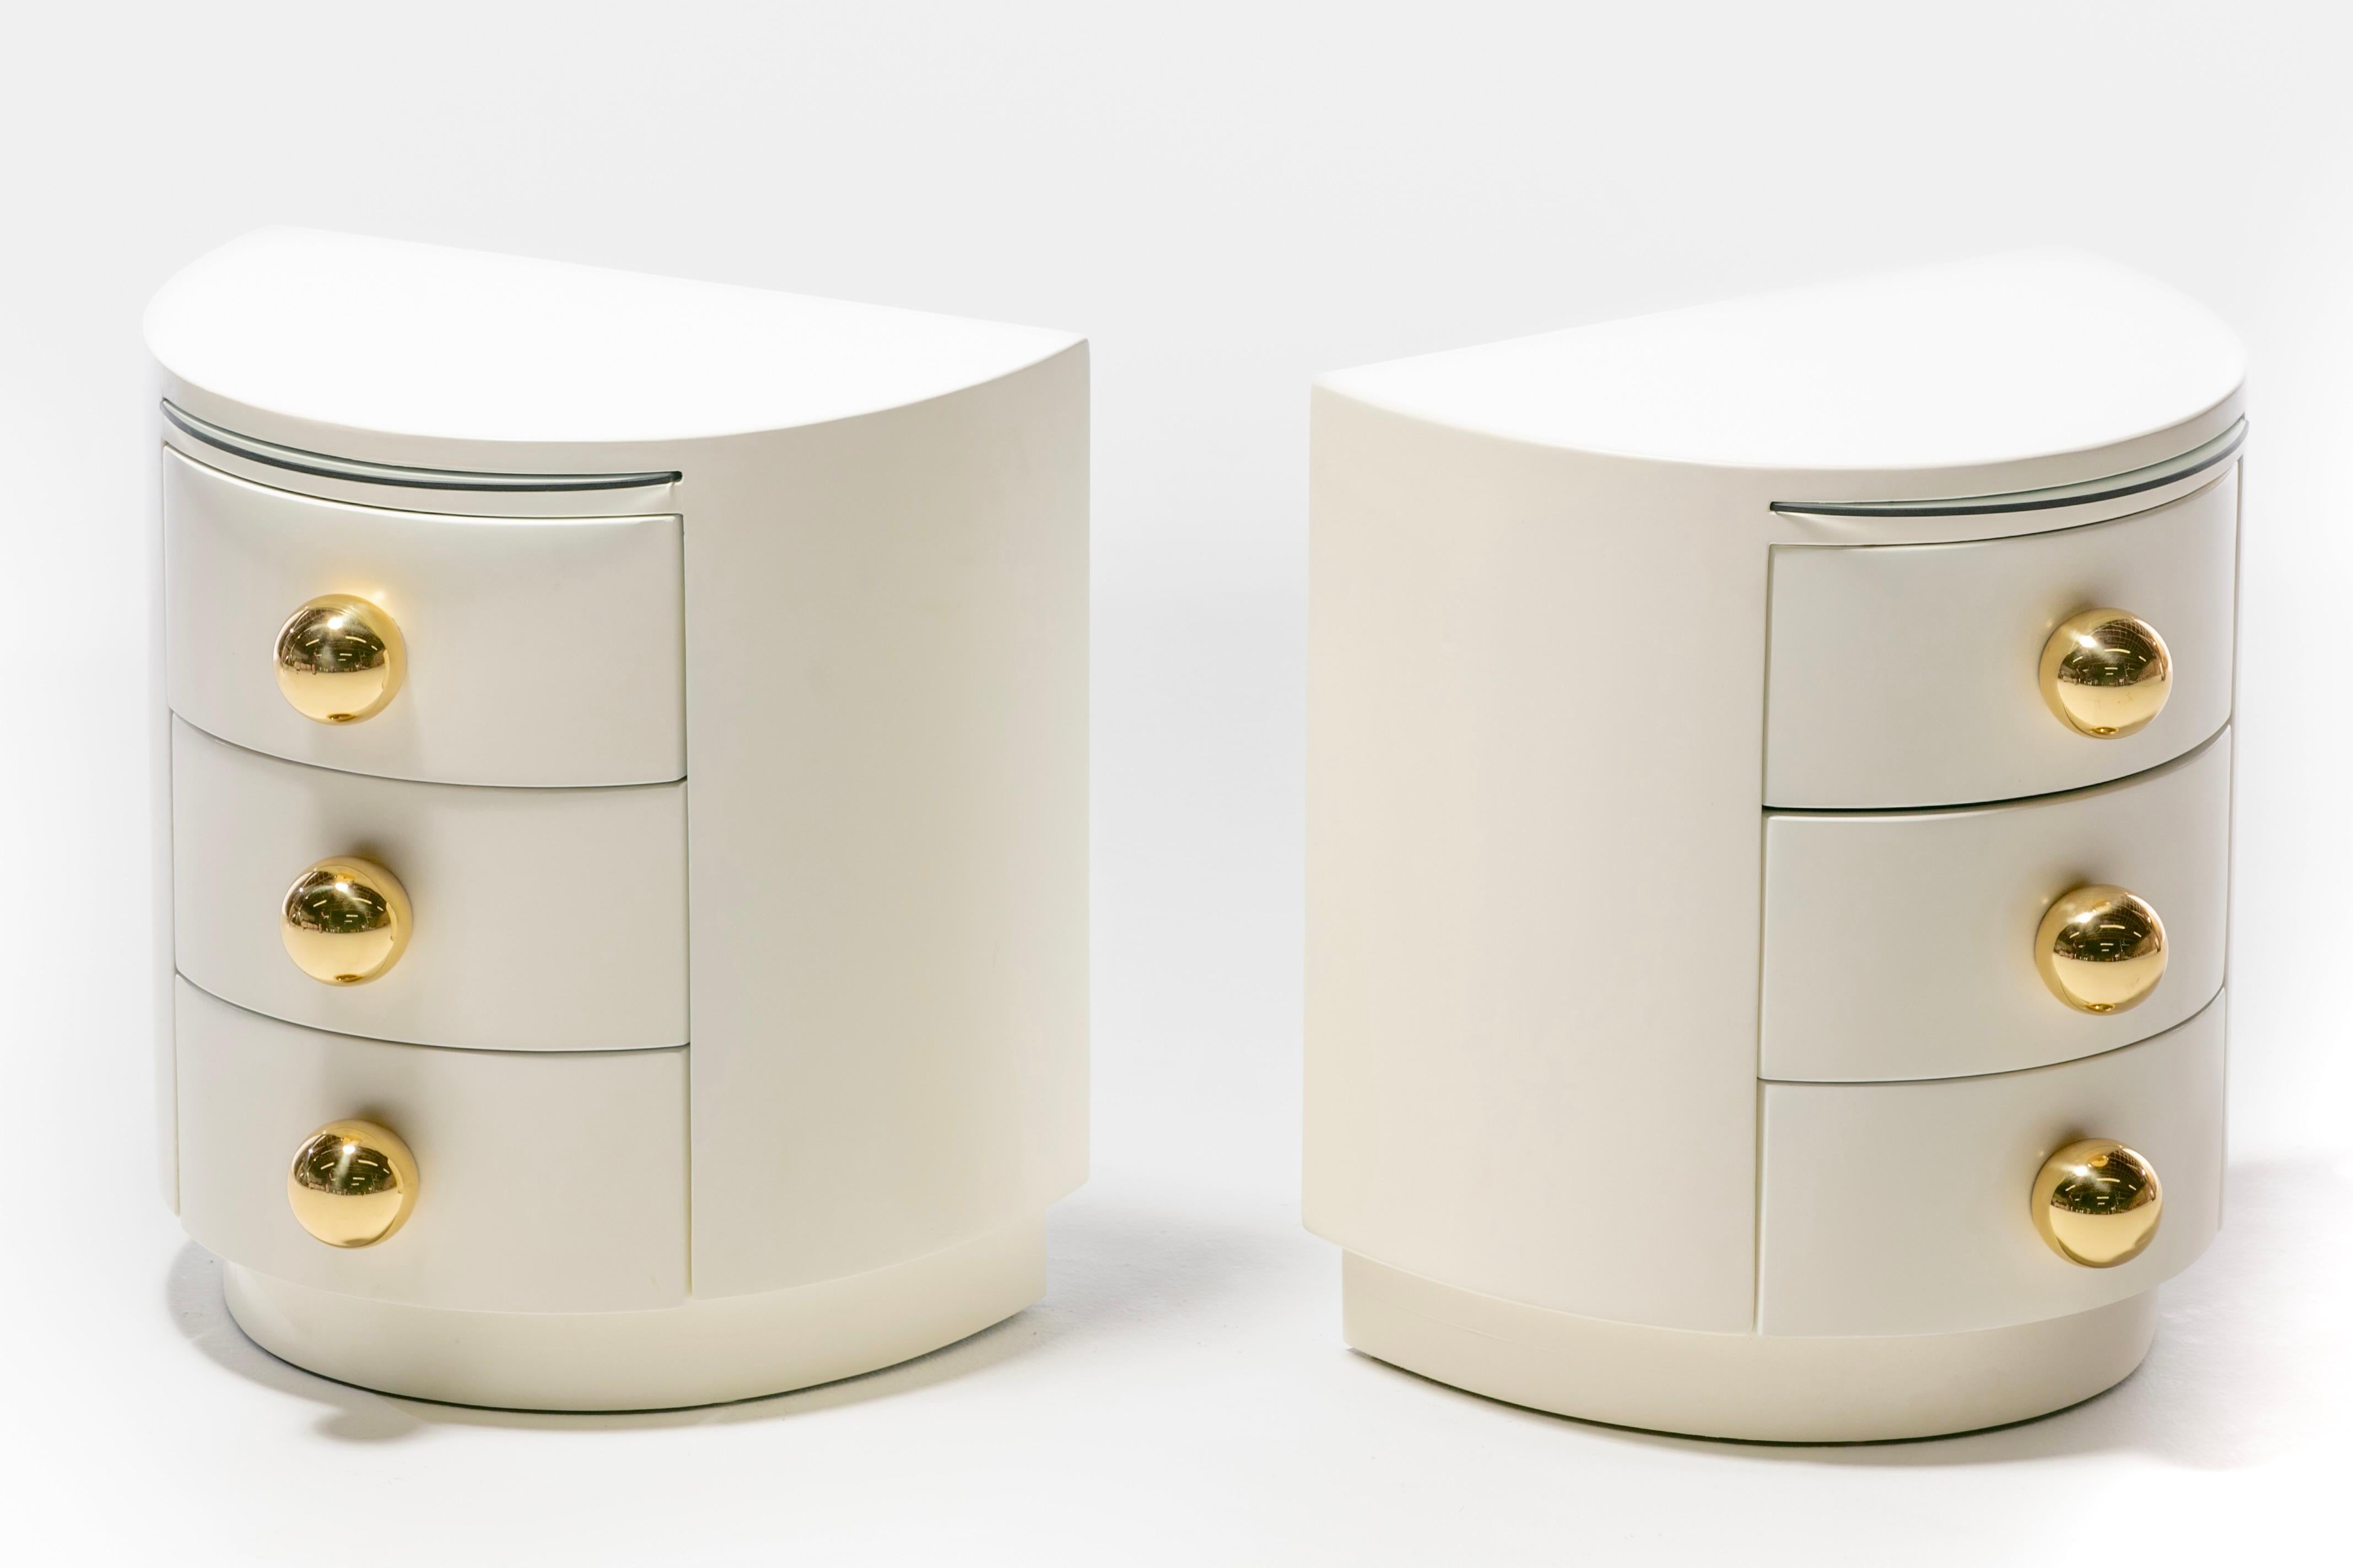 Sexy pair of fully restored from top to bottom Post Modern Night Stands newly refinished in ivory lacquer with professionally polished oversized spherical brass hardware. Modern. Clean. Understated elegance. It's hard to believe these nightstands